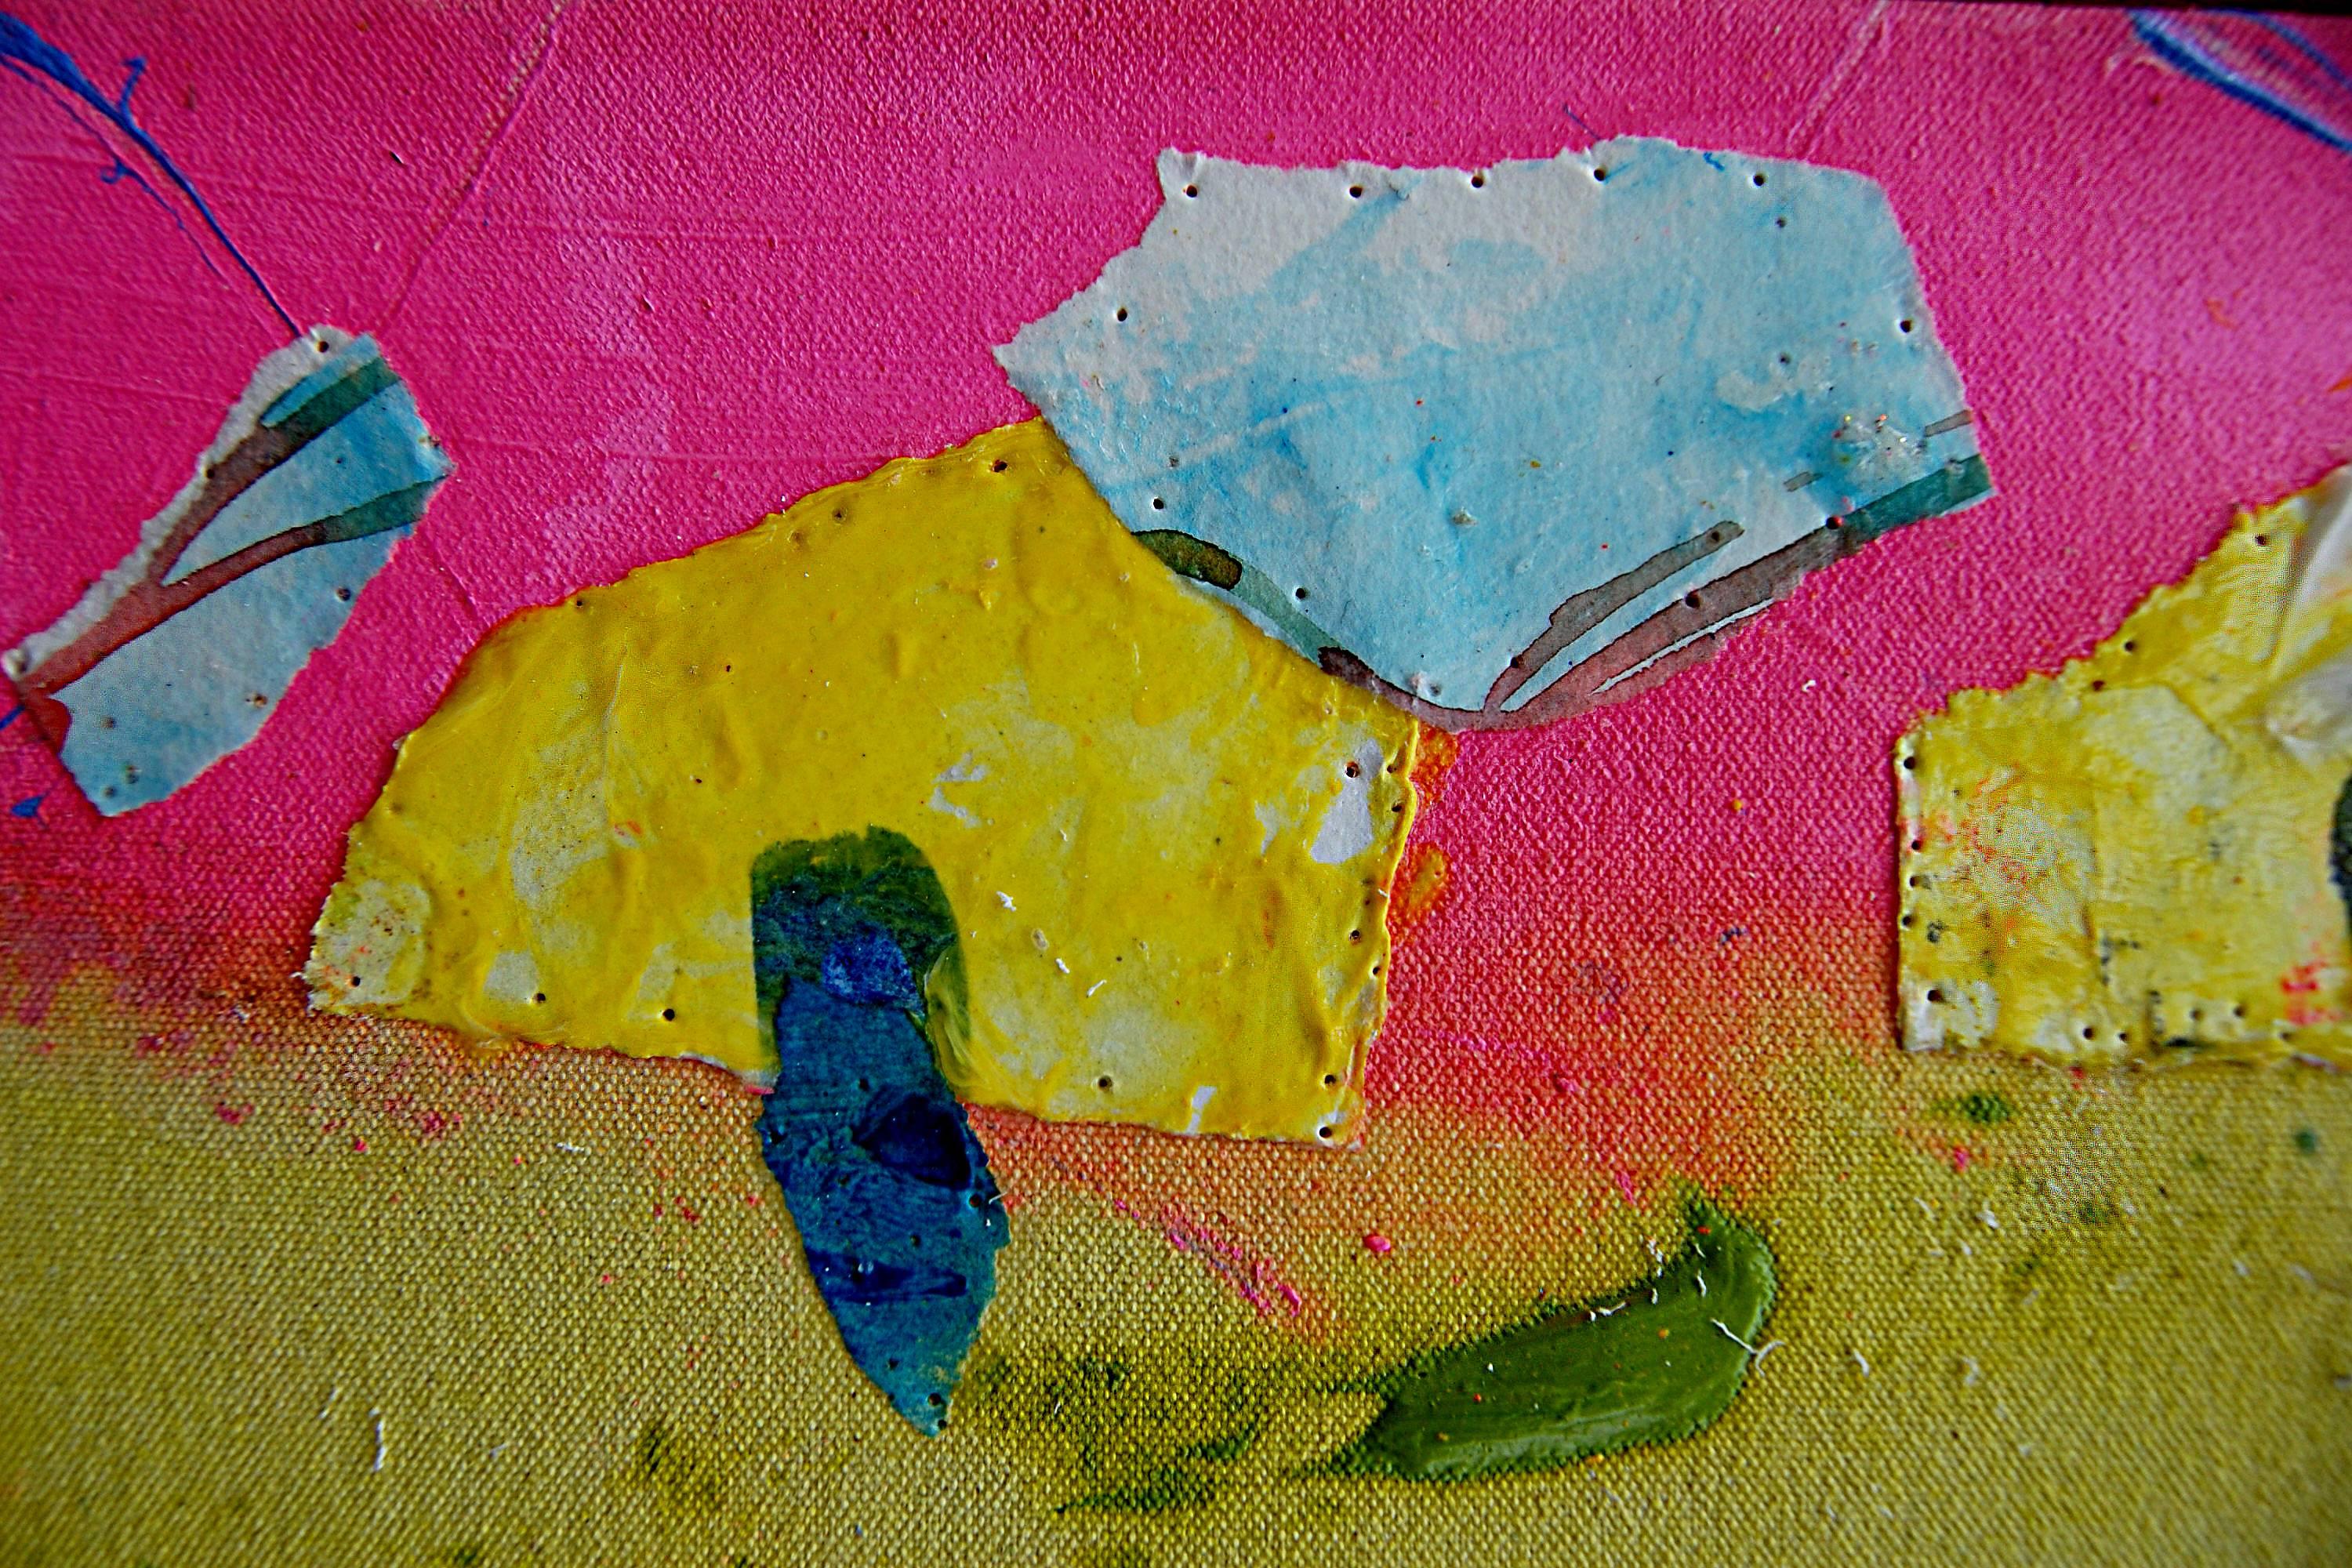 Arthur Yanoff, "Rapture of the King", 2011, Acrylic, pastel, and collage on canvas, 55.13" x 31.63"

"Rapture of the King" boasts bold layers of shades of yellow accented by collaged pinks, blues, and greens along the